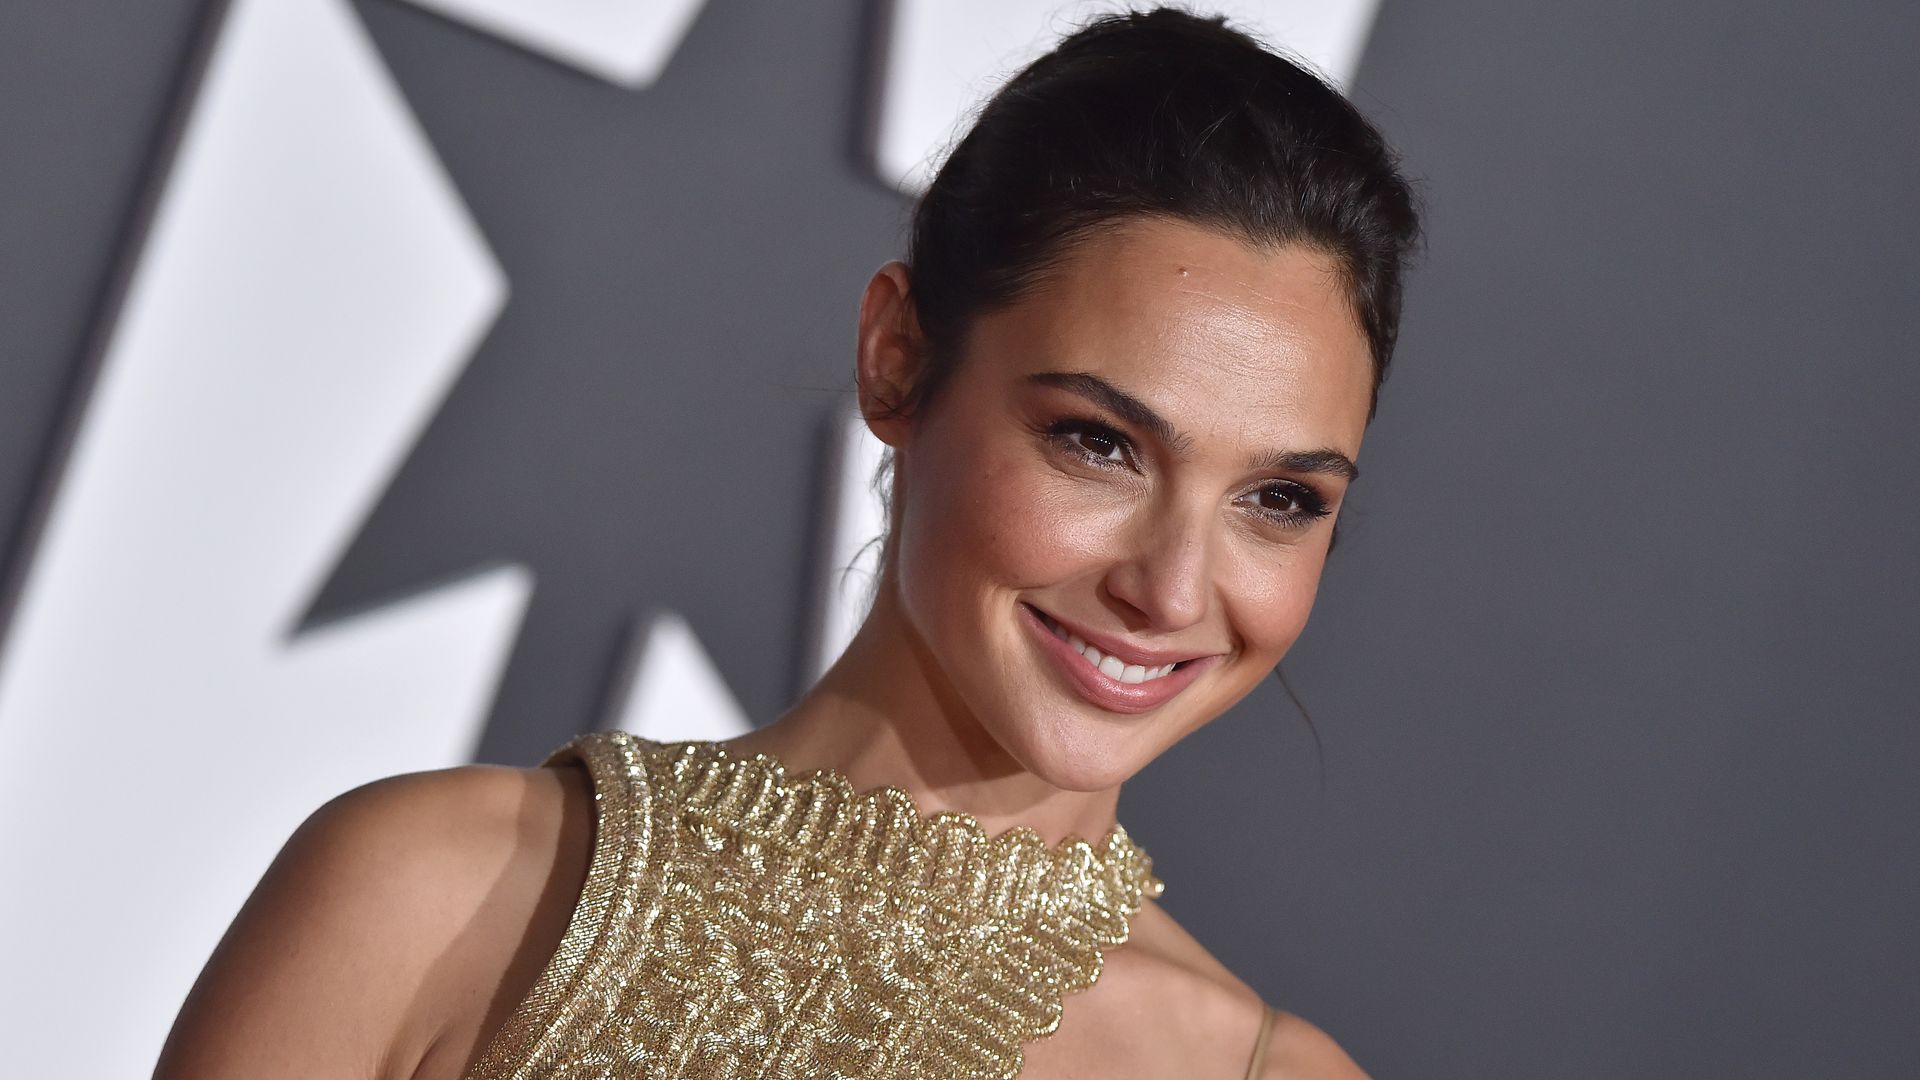 Gal Gadot stuns in pinstripe outfit that will make your head spin